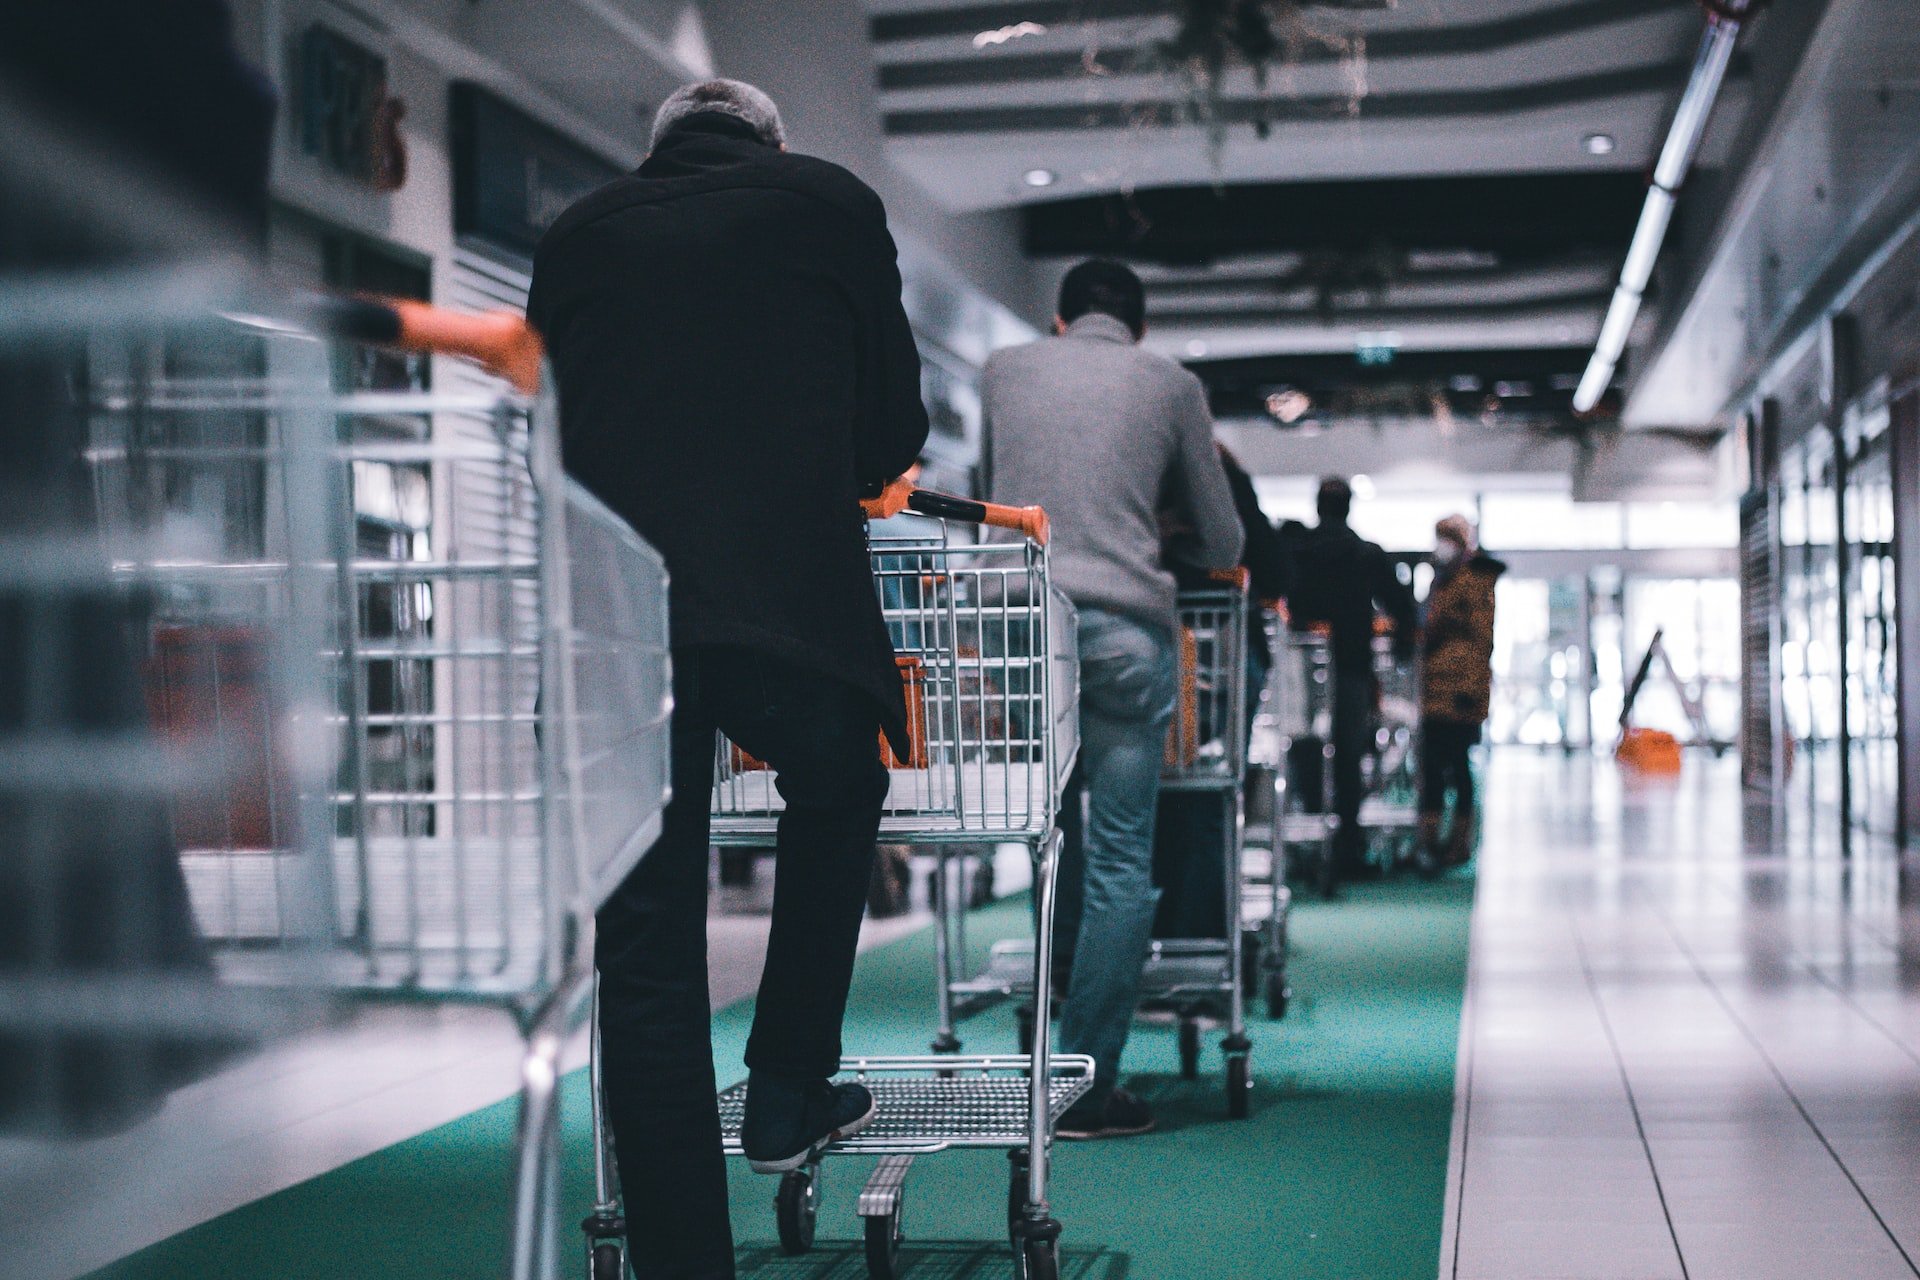 Queue of individuals standing with carts